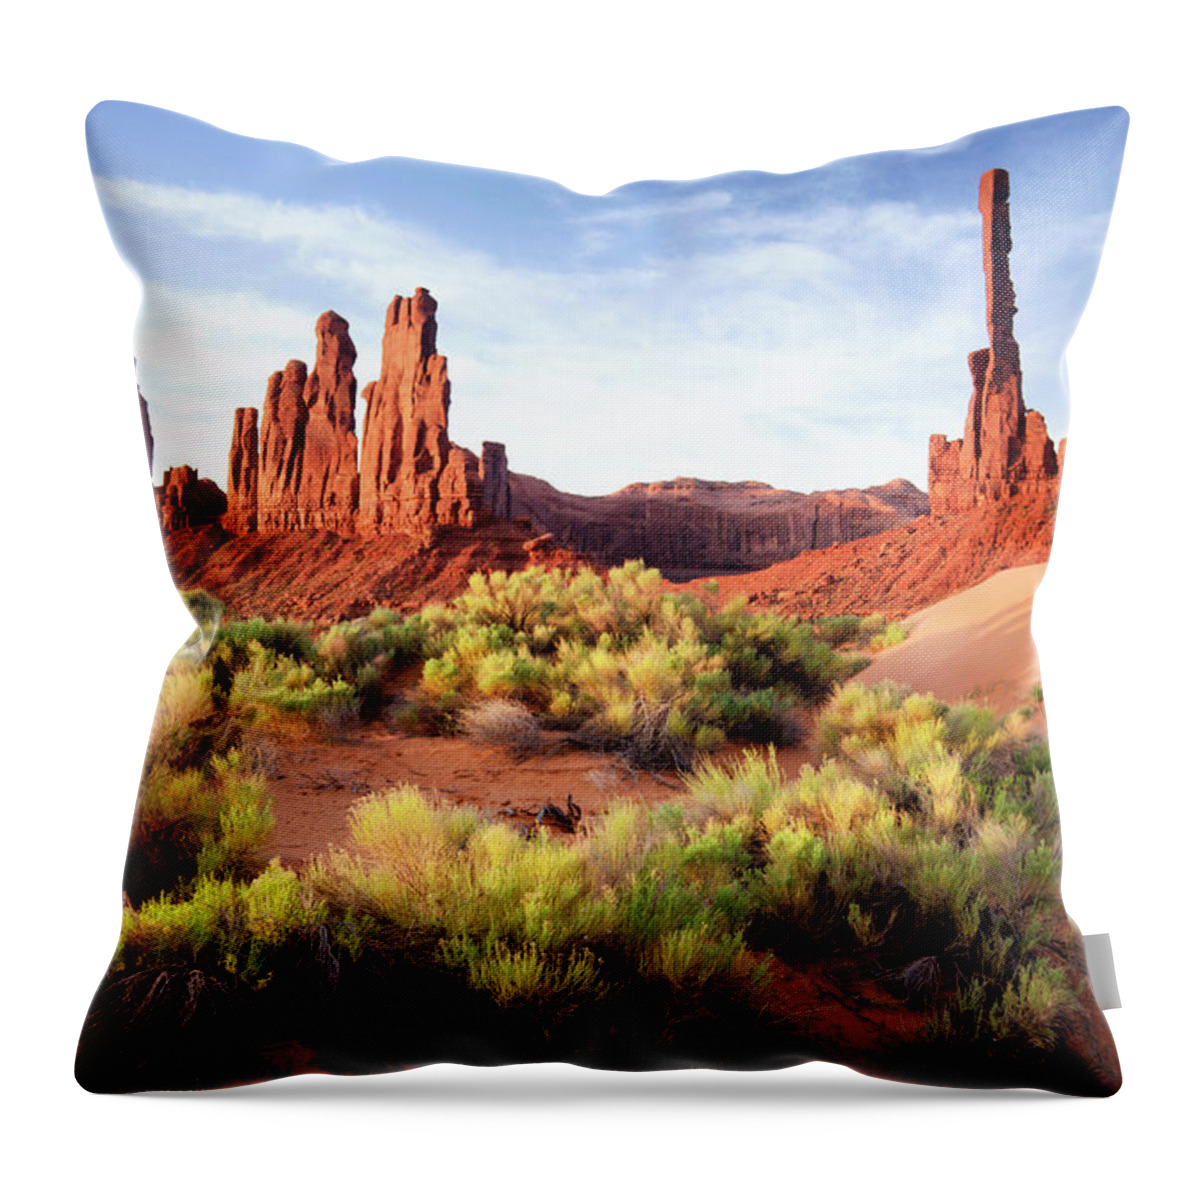 Scenics Throw Pillow featuring the photograph The Gossips And Totem Pole - Monument by Powerofforever